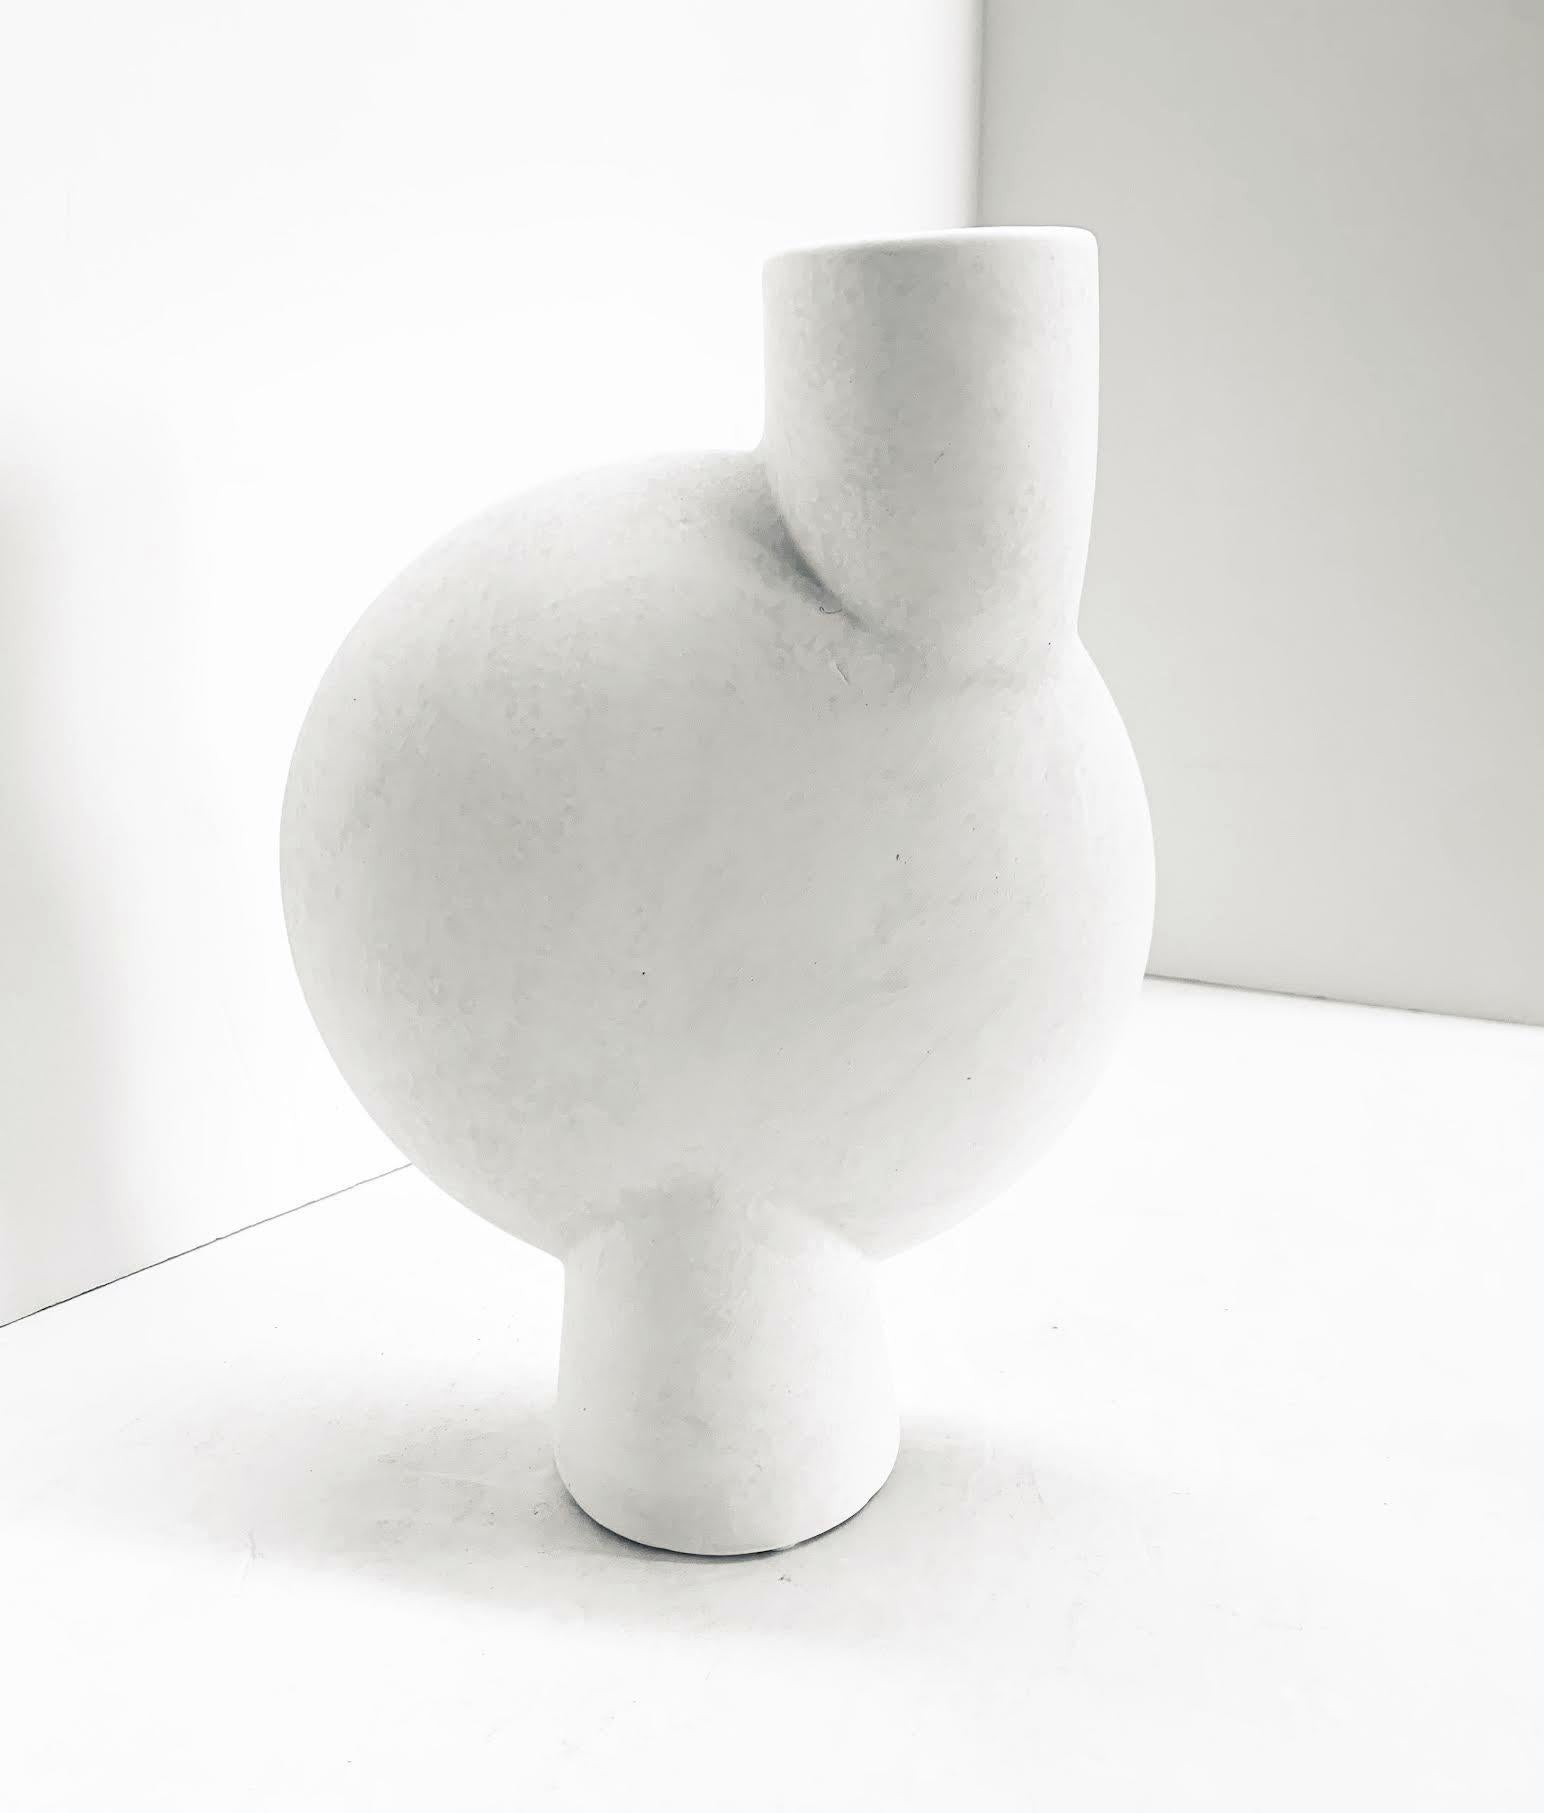 Contemporary Danish designed off center shaped vase.
Smooth white finish.
From a very large collection.